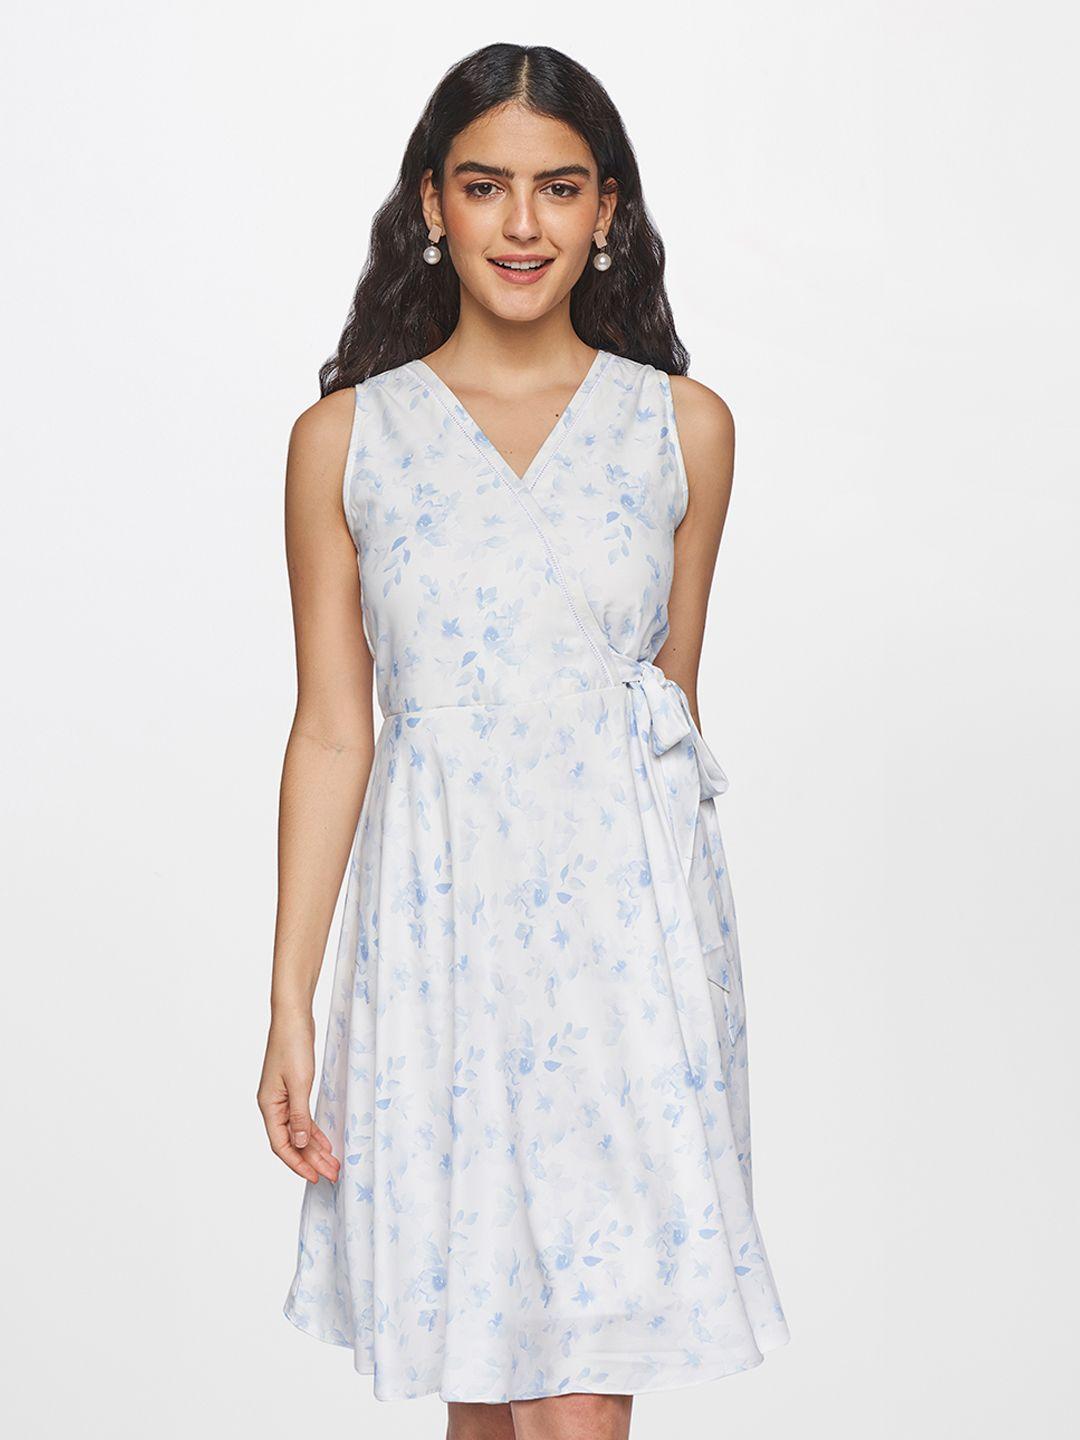 and white & blue floral dress